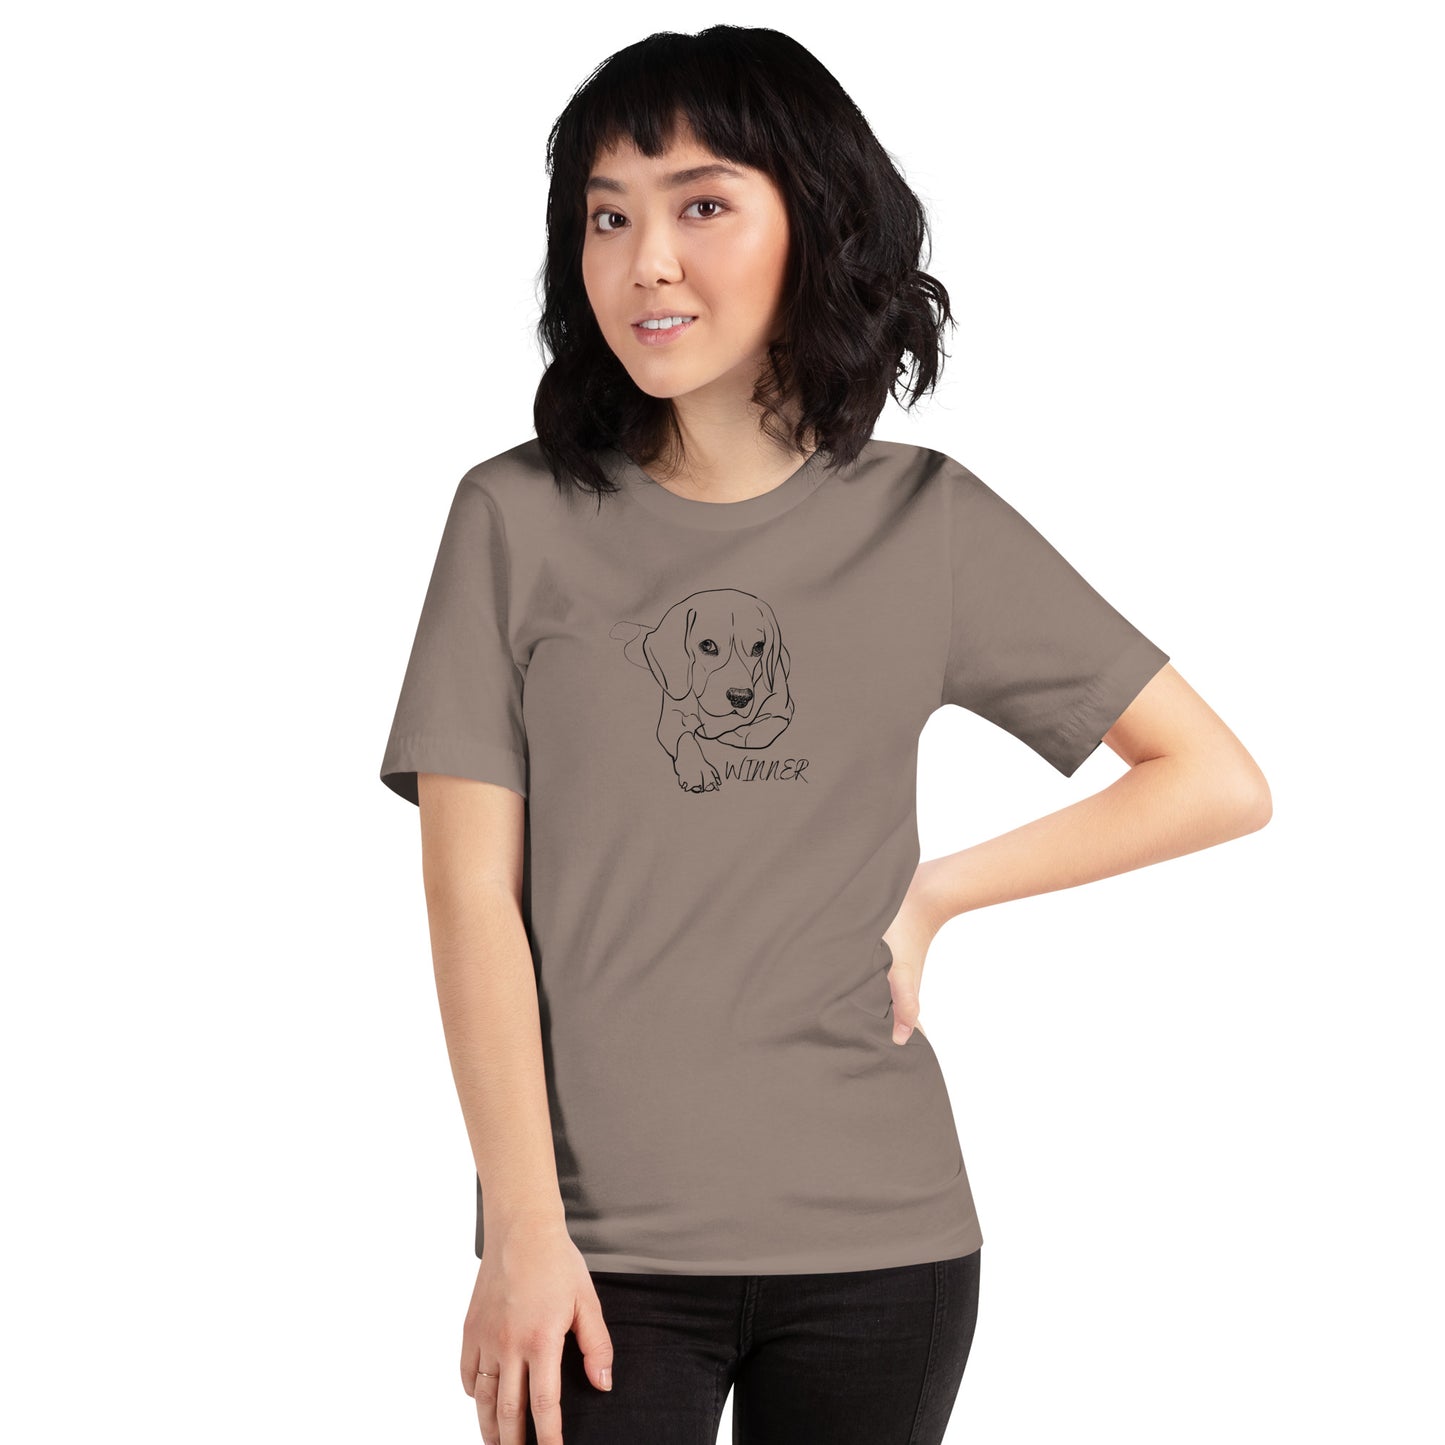 Unisex t-shirt with the image of the Beagle